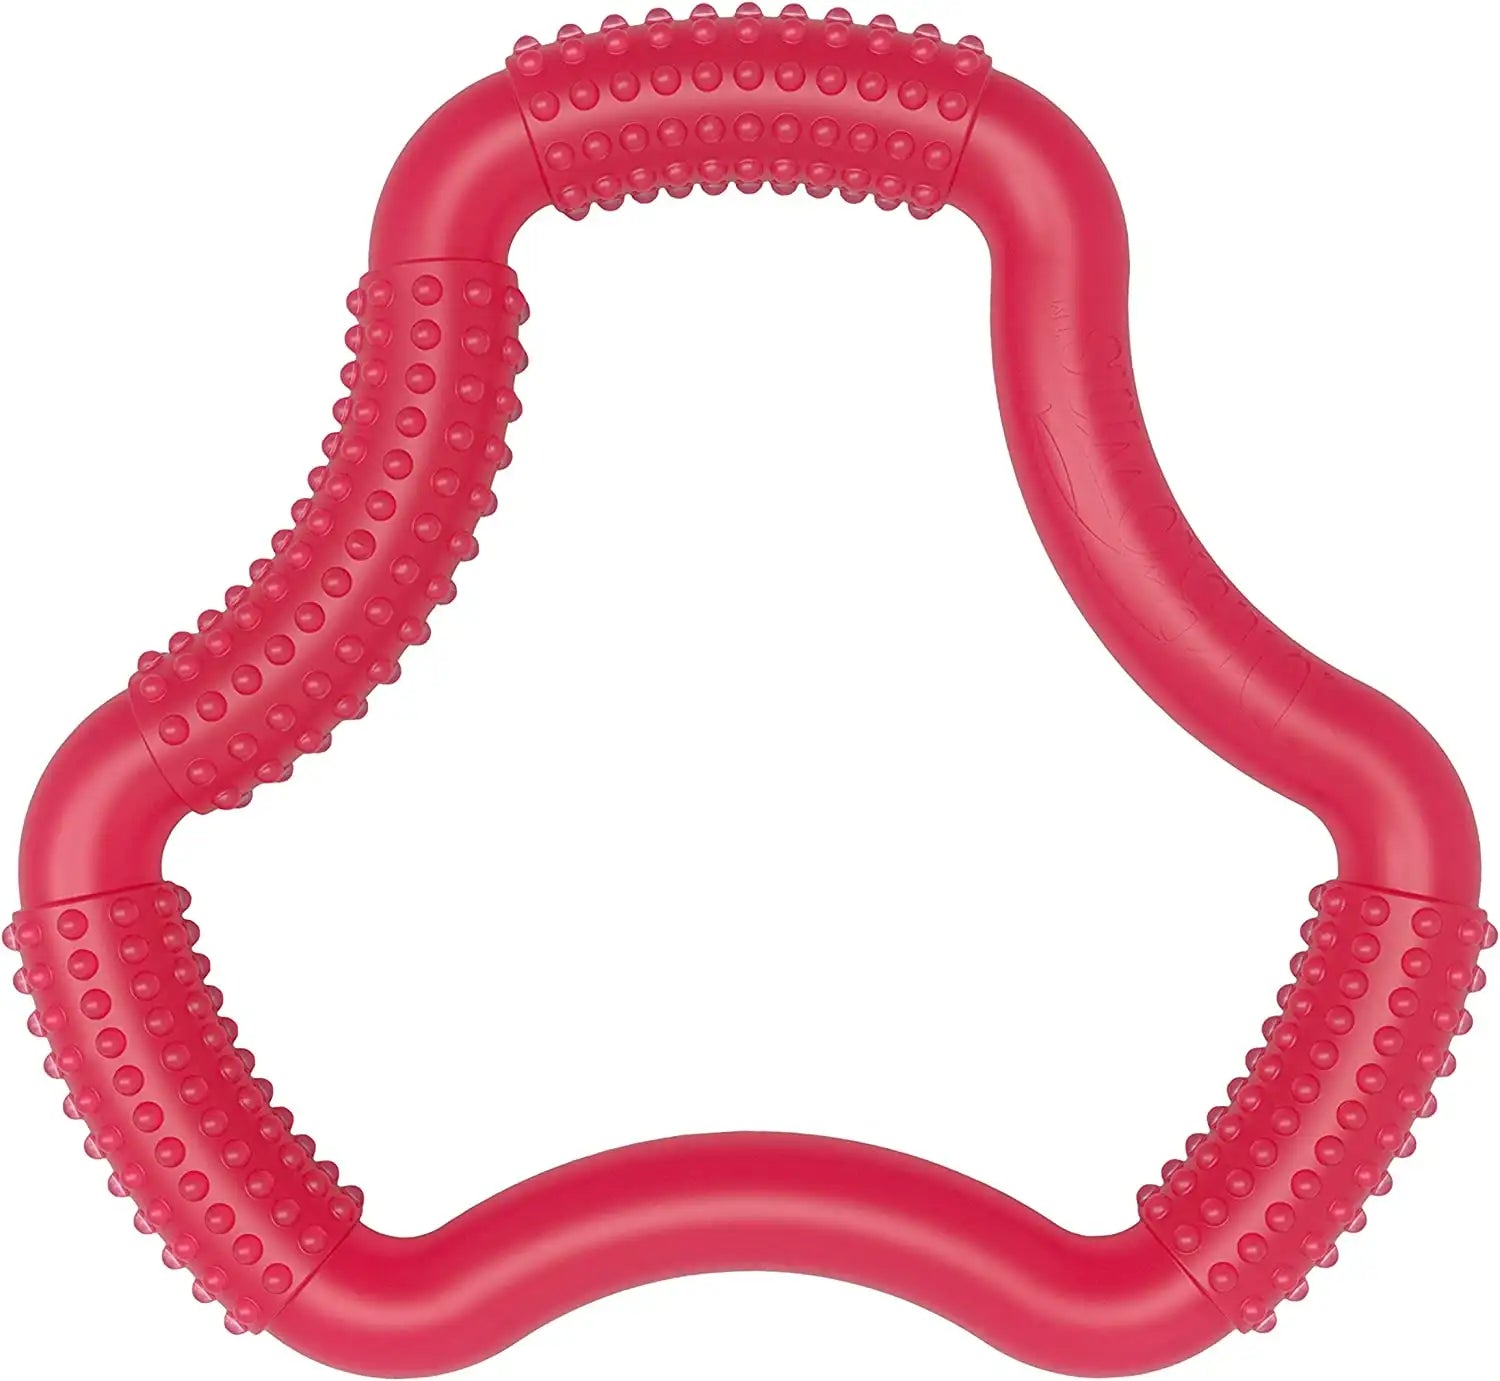 A-Shaped Teether "Flexees" (Red)